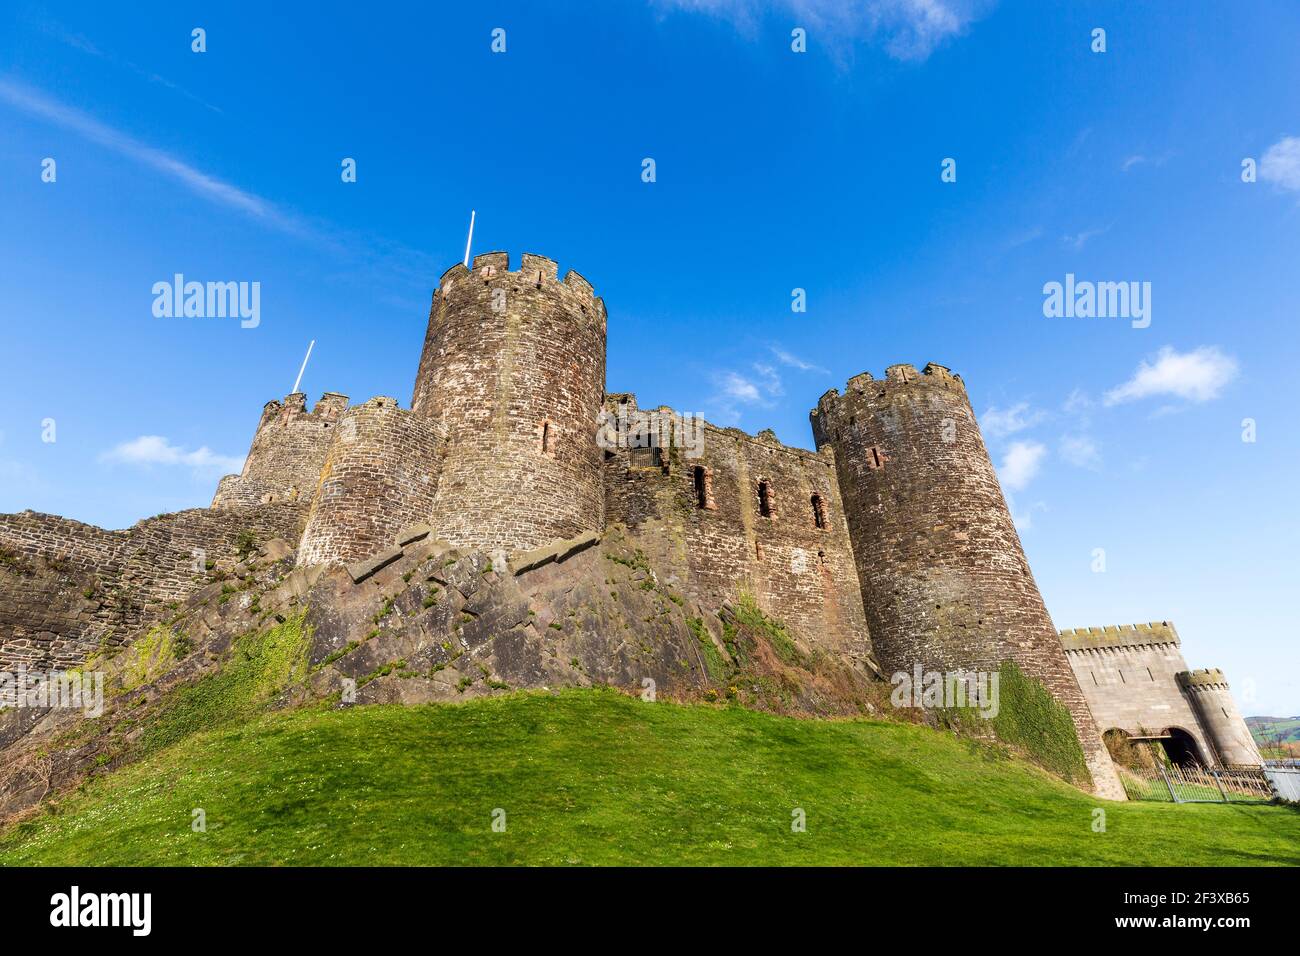 The medieval fortified wall of Conwy Castle, Wales Stock Photo